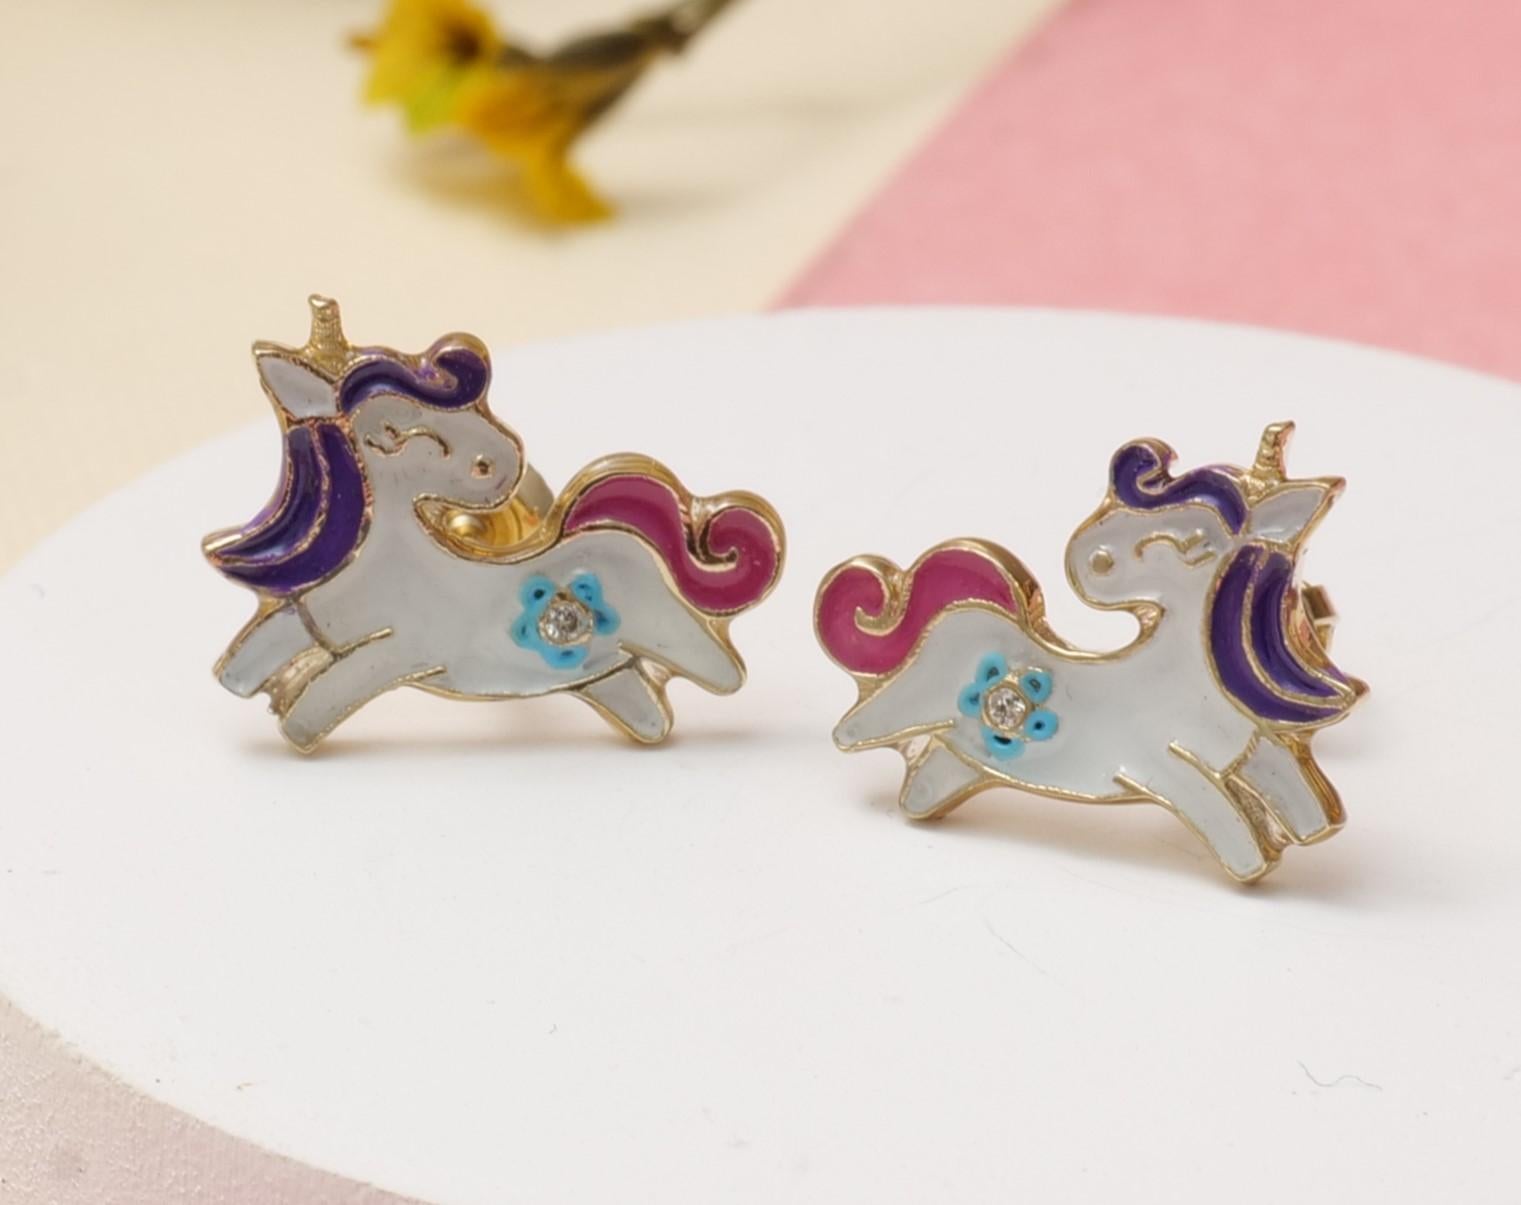 Enameled unicorn diamond earrings for girls, kids, and toddlers in 18K solid gold bring a magical and whimsical charm to little ears. Meticulously crafted, these enchanting earrings feature a delightful unicorn design adorned with colorful enamel,